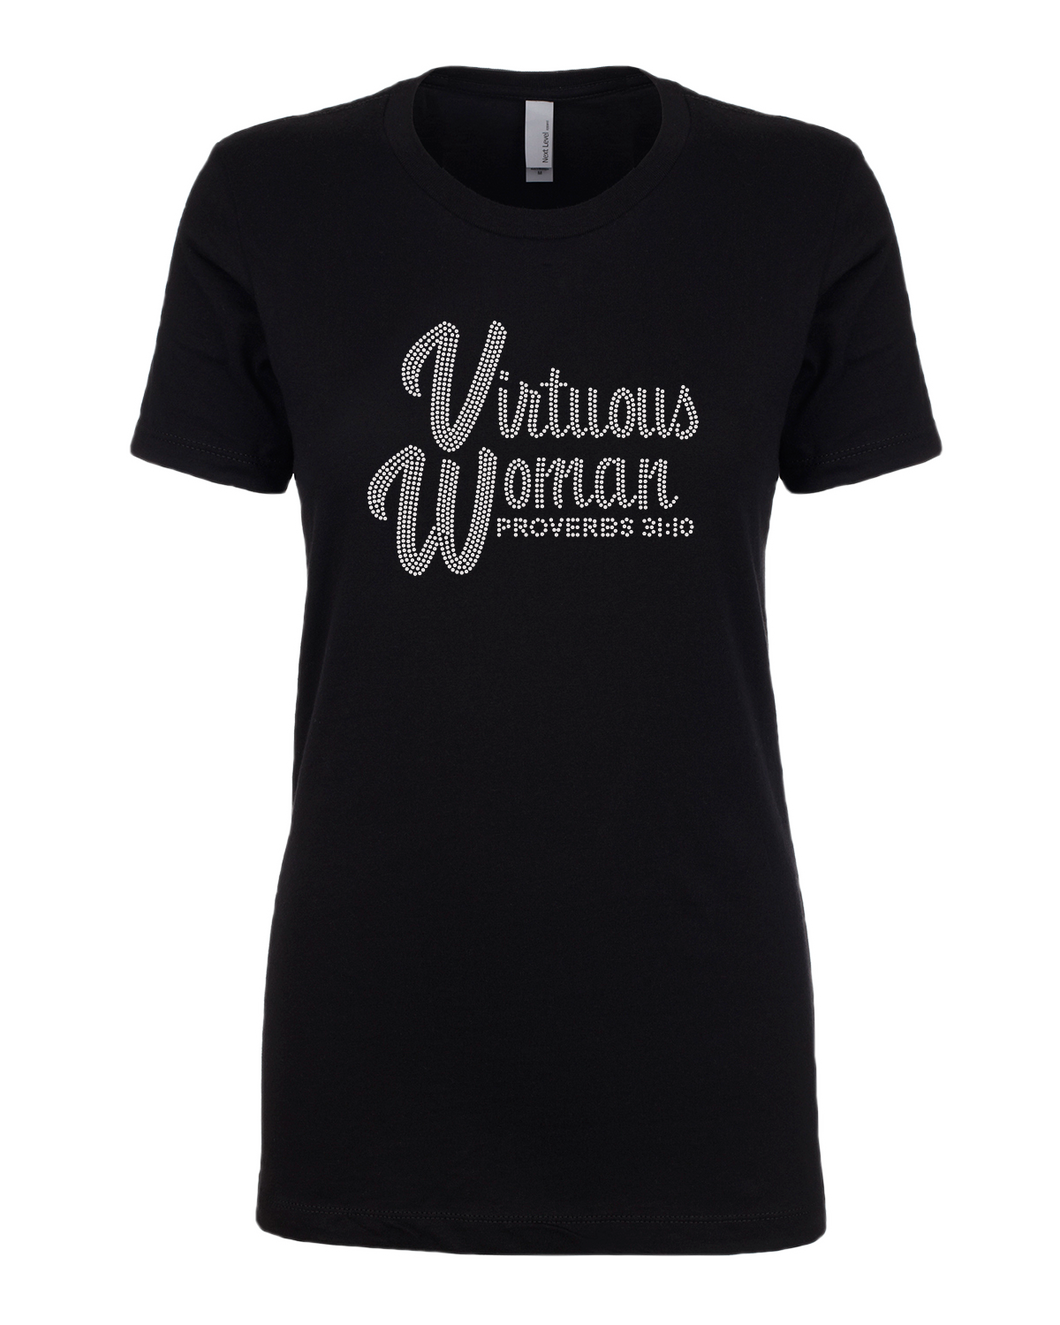 Virtuous Woman - Proverbs 31:10